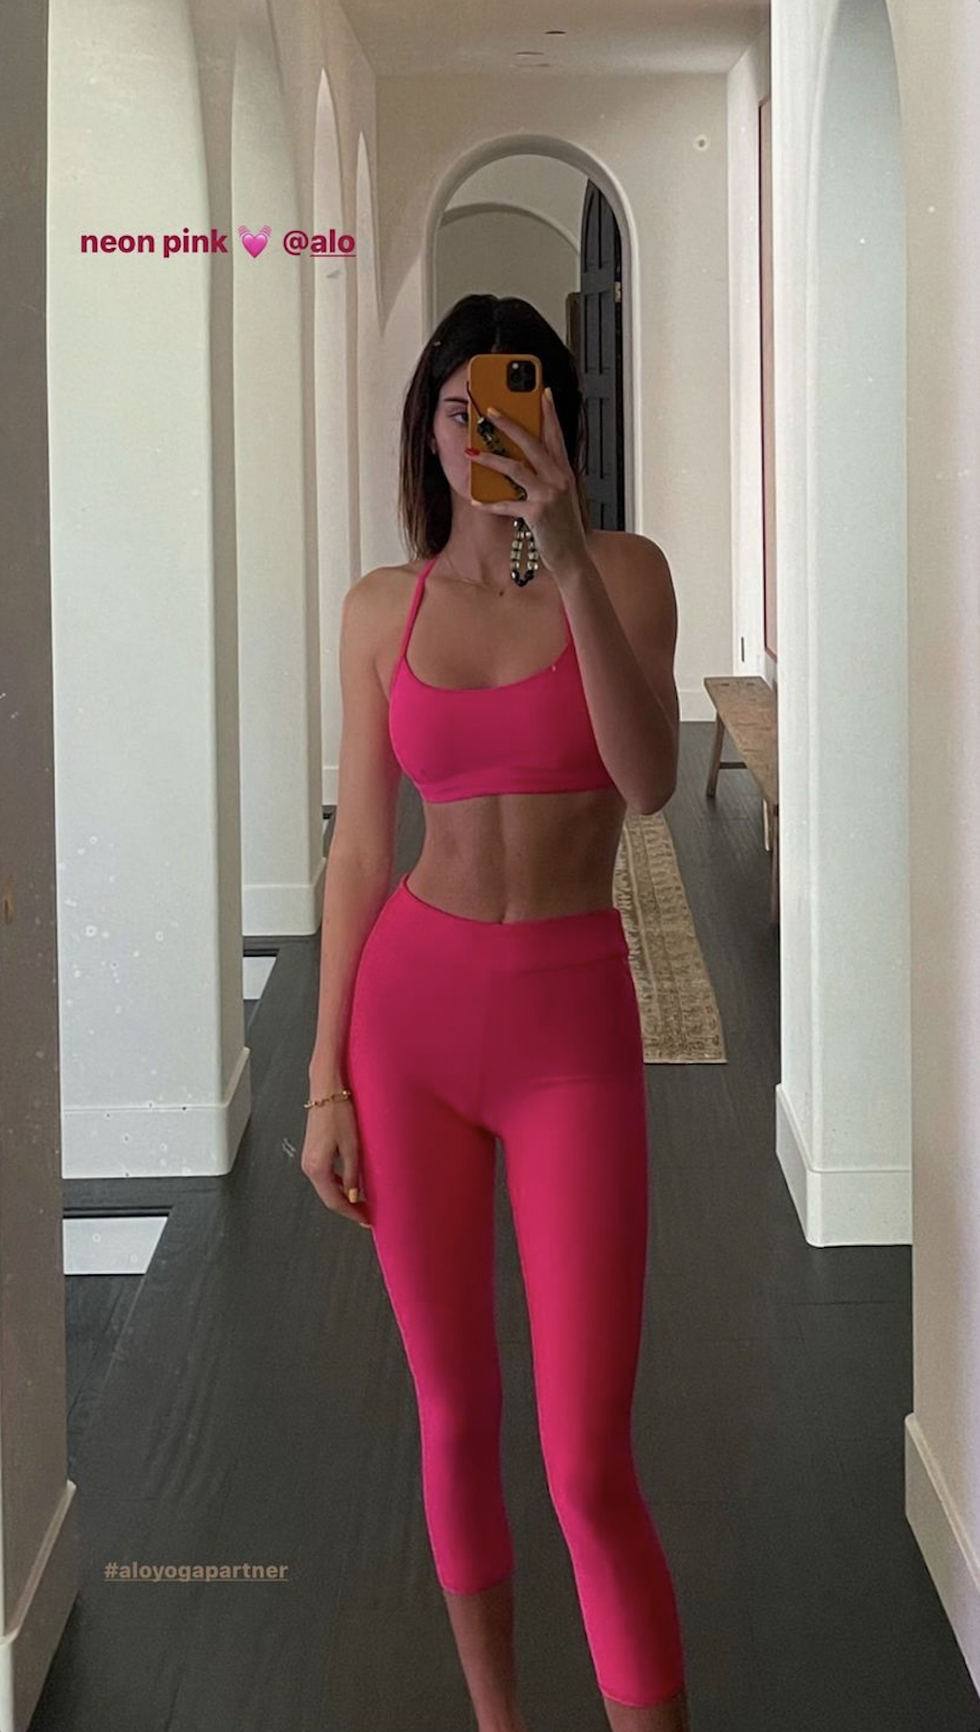 Kendall Jenner's Serving Body in A Pink Alo Sports Bra and Leggings